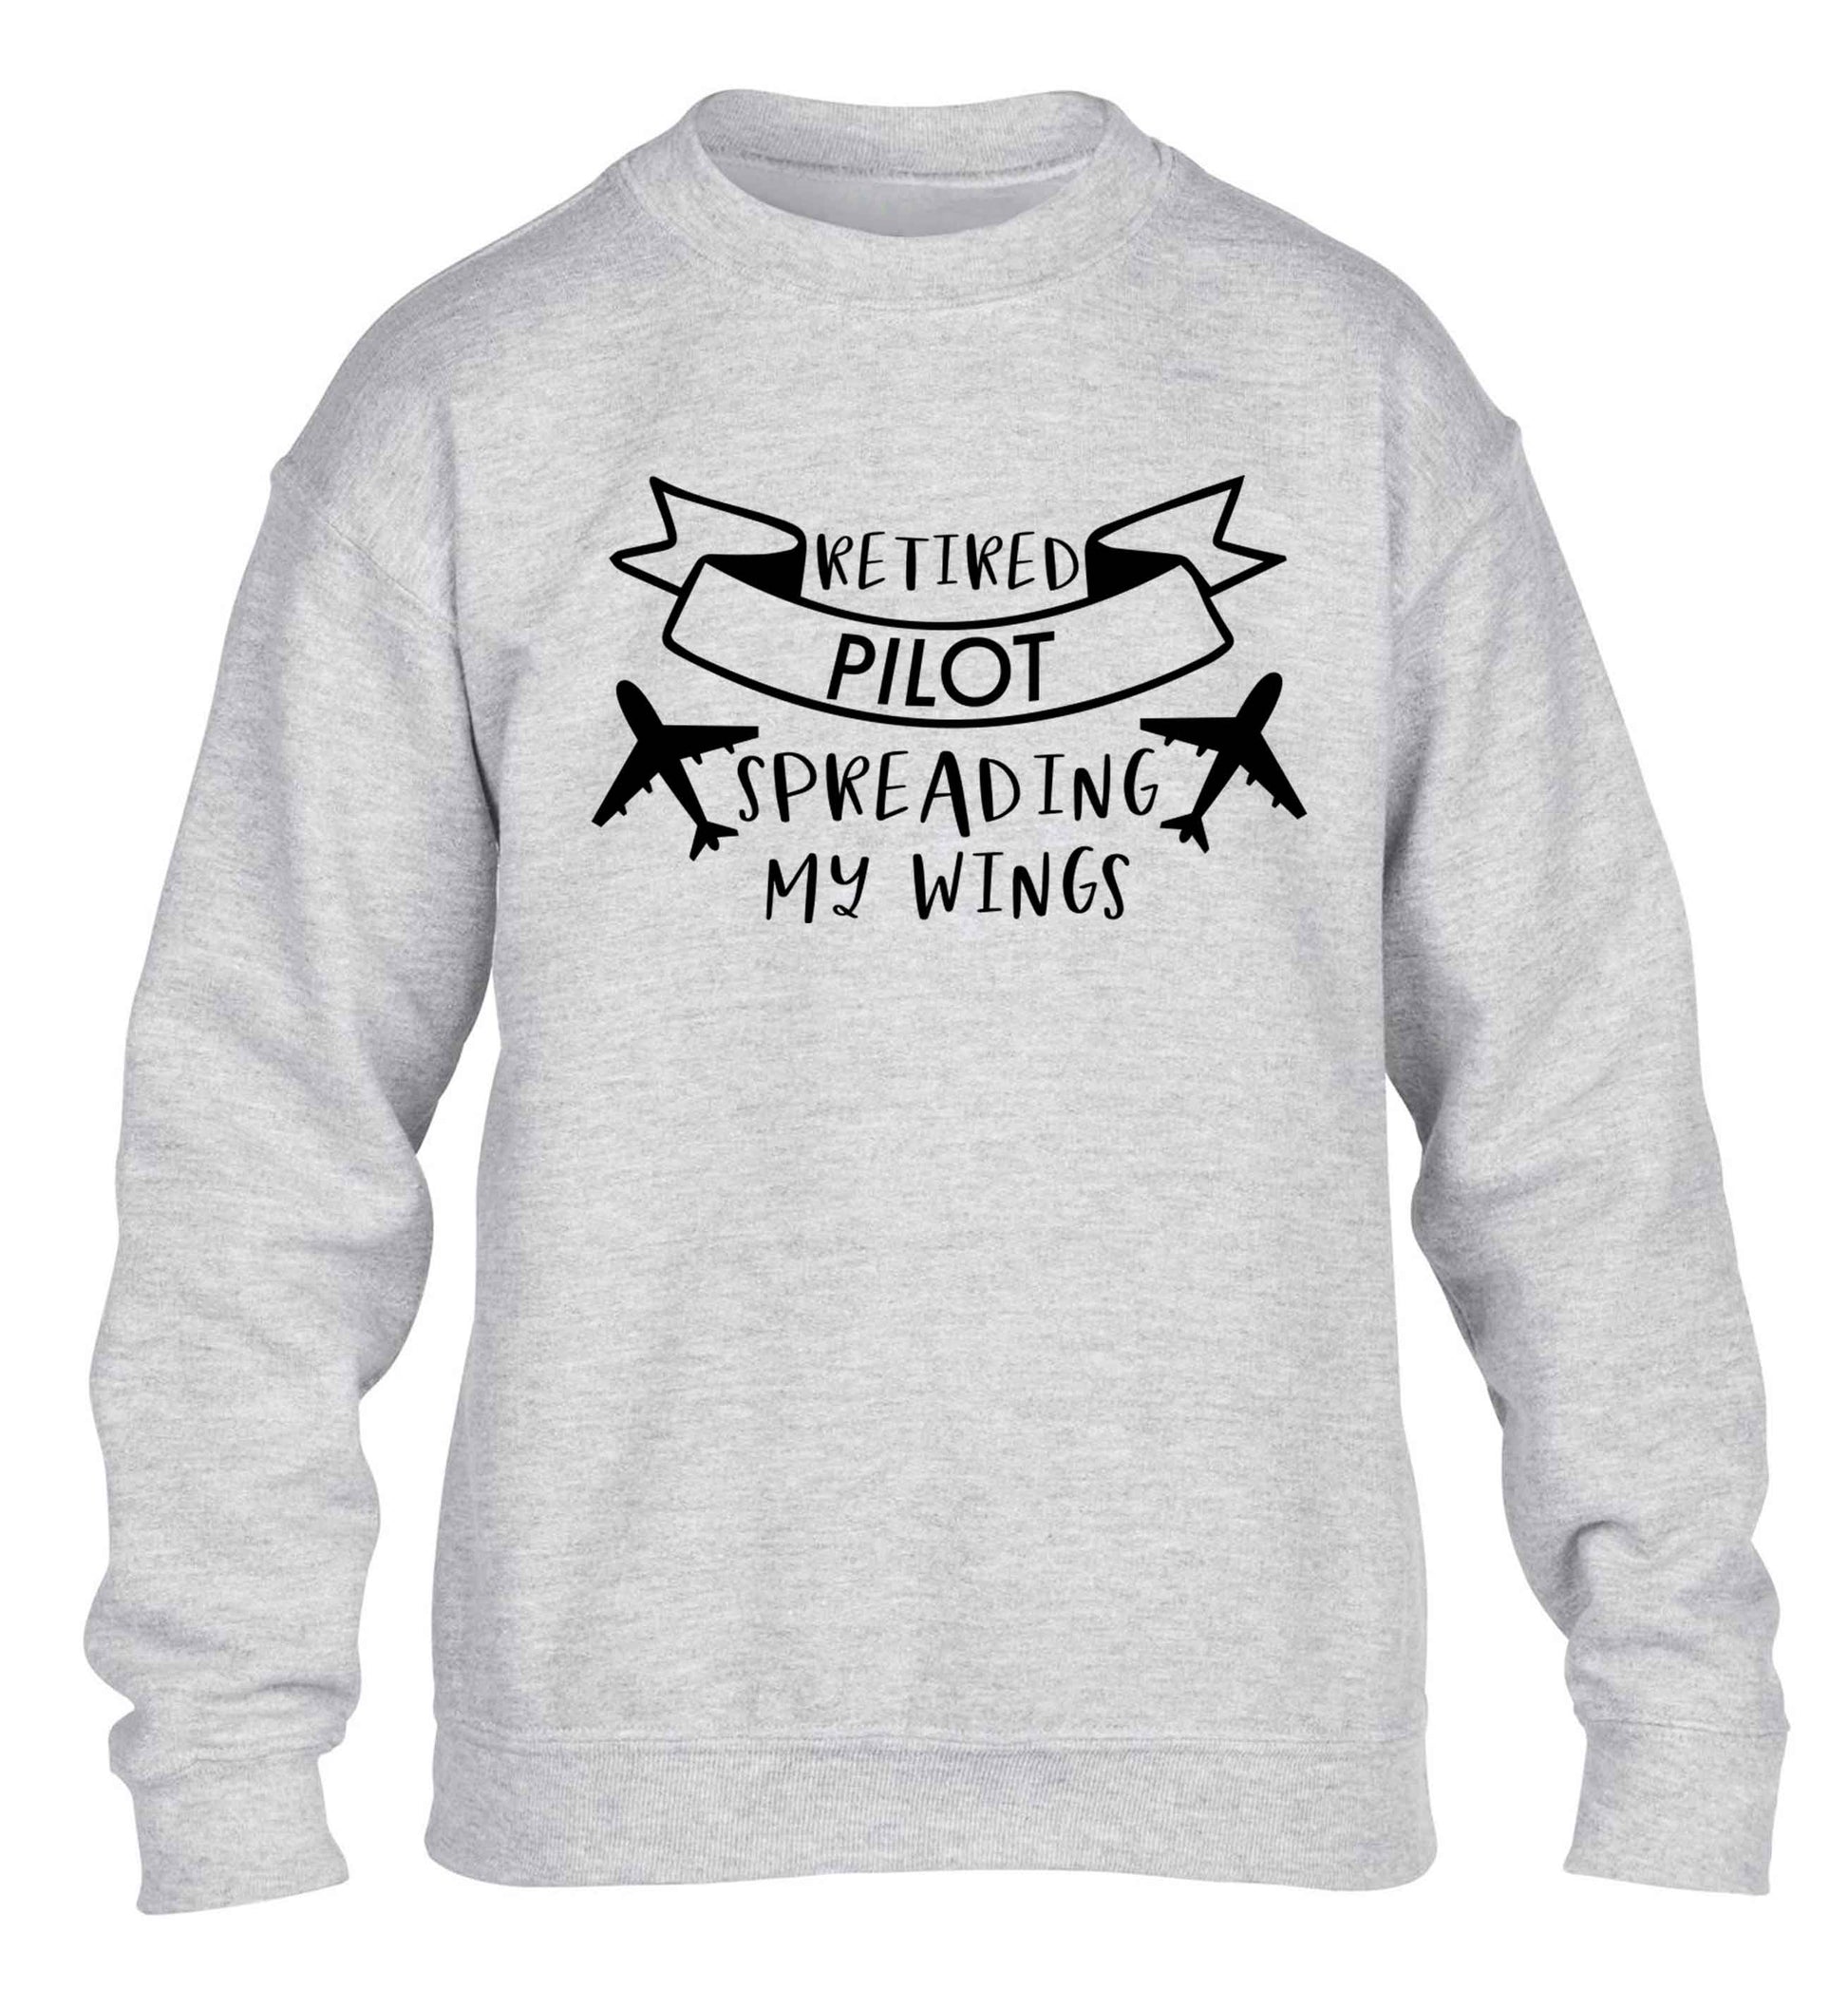 Retired pilot spreading my wings children's grey sweater 12-13 Years